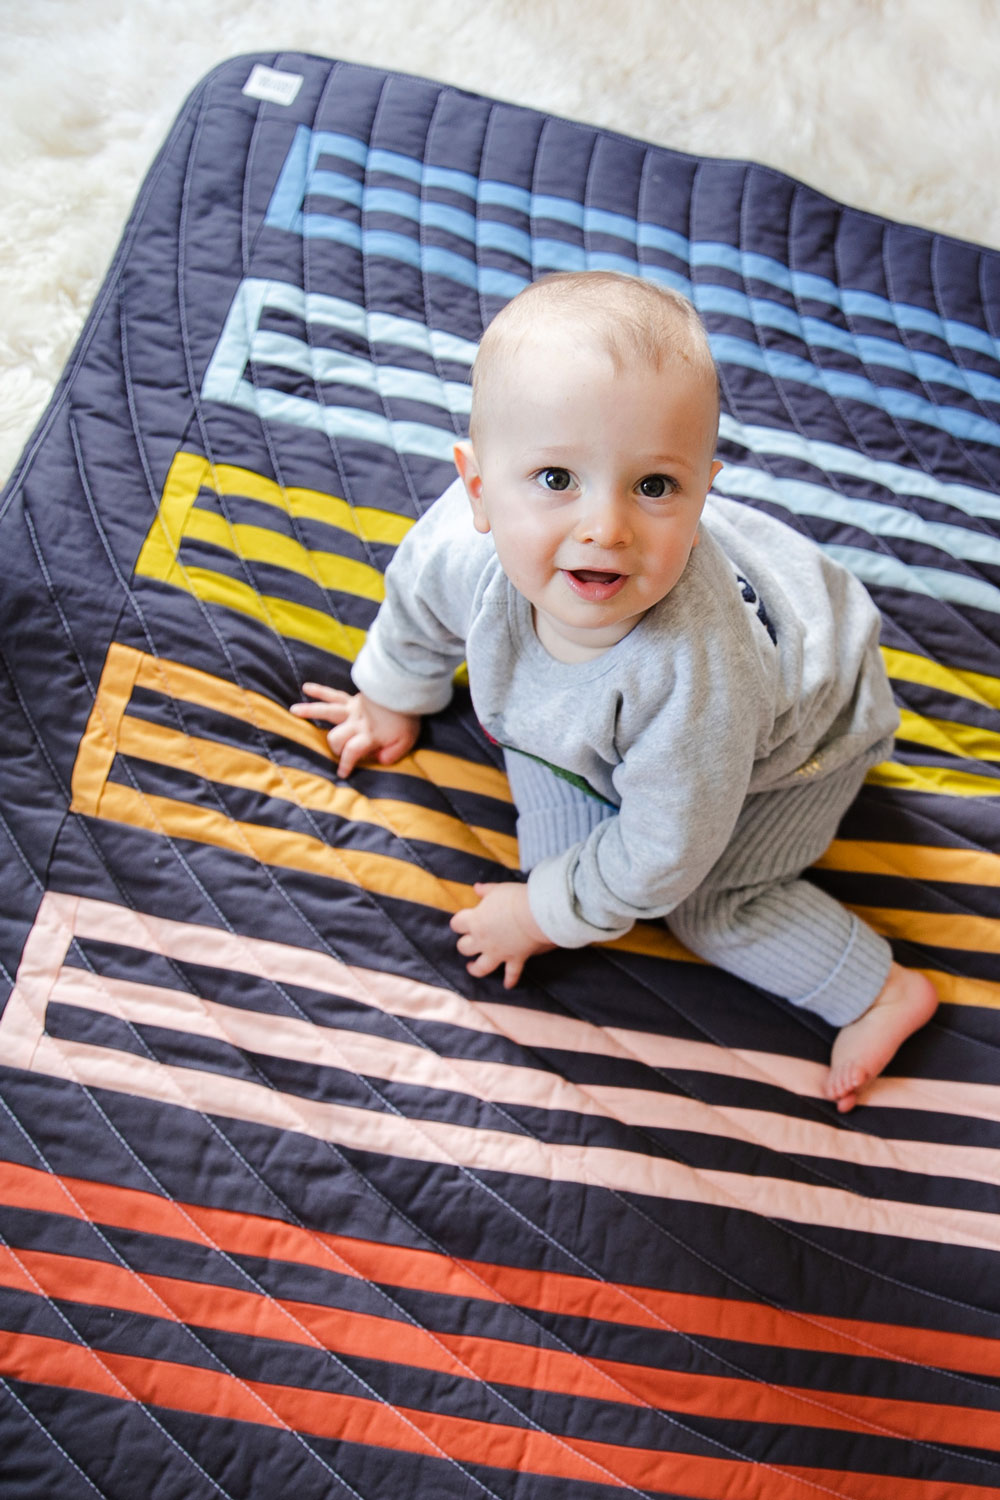 A small textiles company, based in Duluth, GA, makes rainbow baby quilts for a cause. These handmade baby quilts support local charities. suzyquilts.com #rainbowbaybquilt